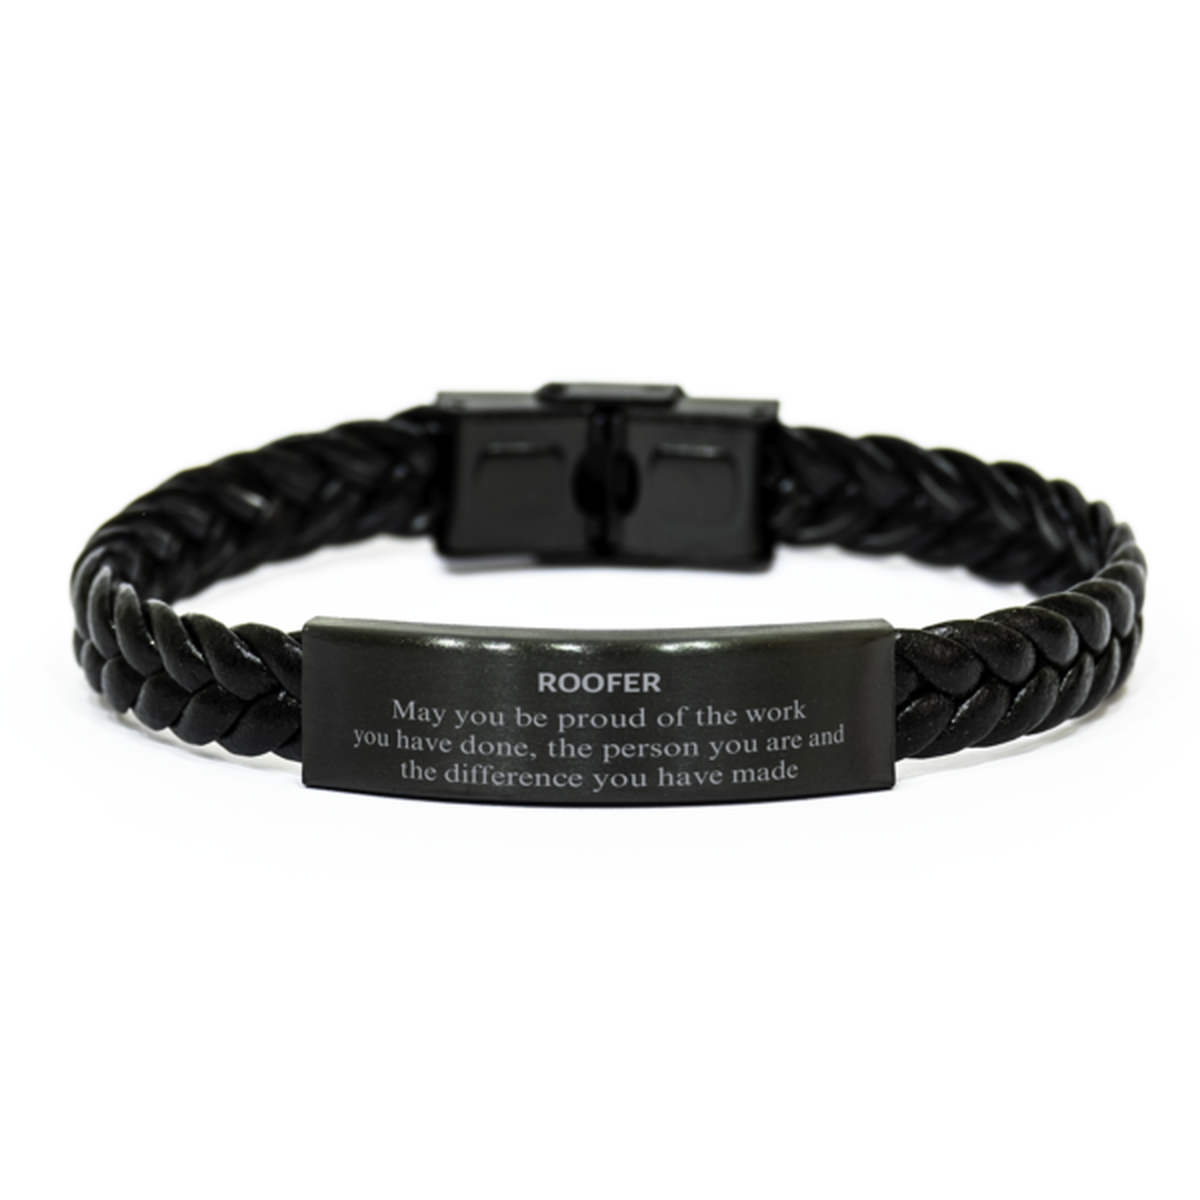 Roofer May you be proud of the work you have done, Retirement Roofer Braided Leather Bracelet for Colleague Appreciation Gifts Amazing for Roofer